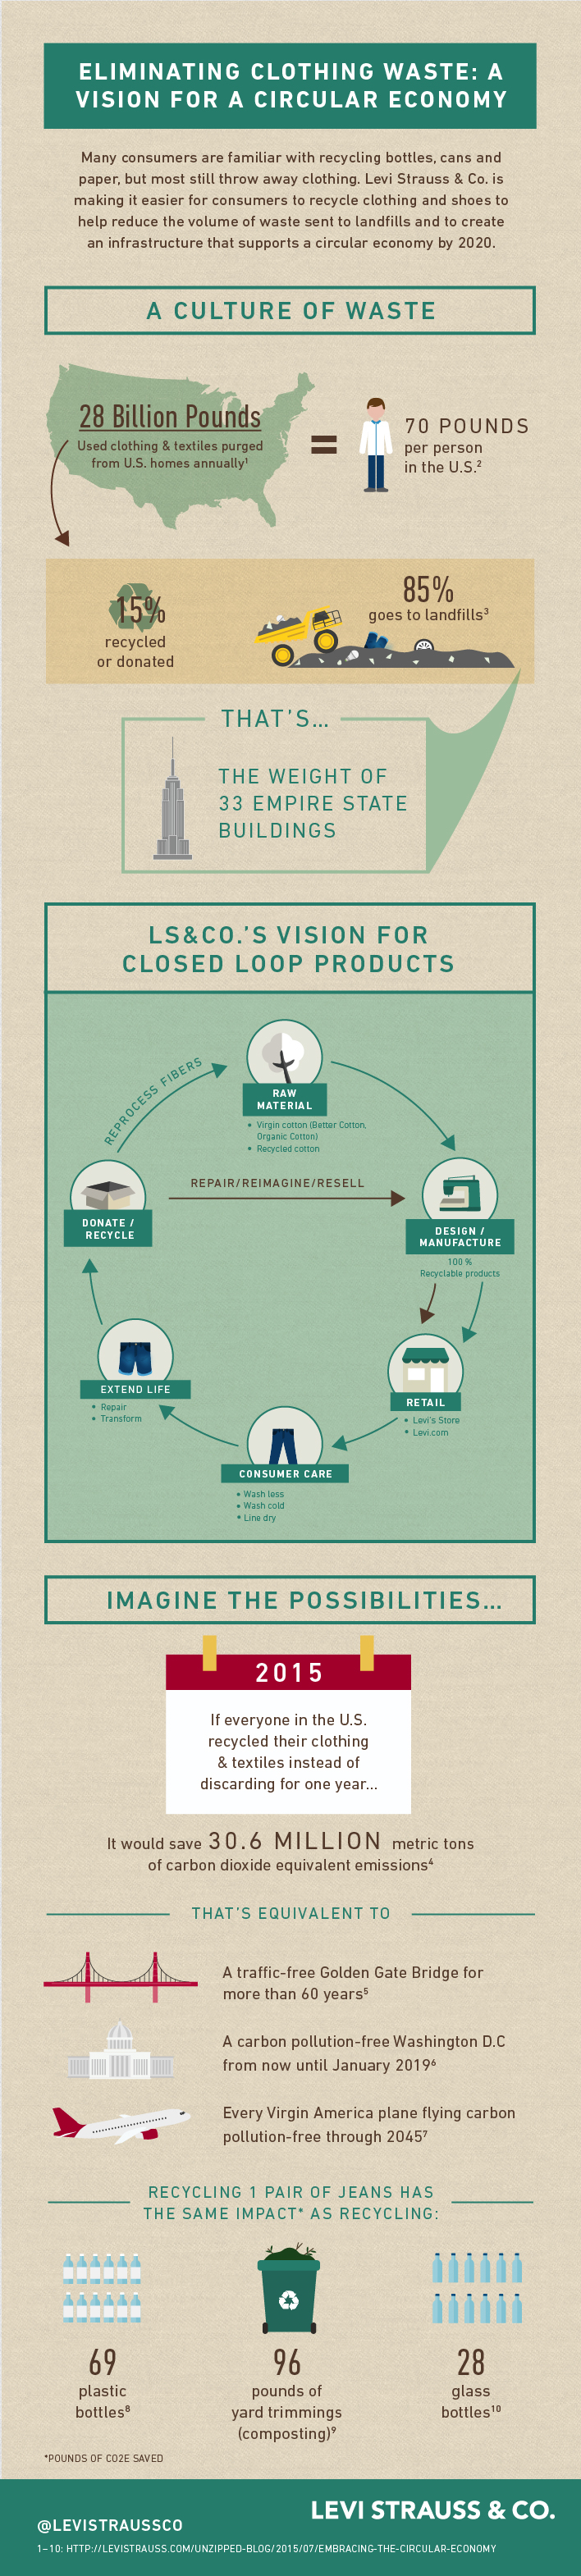 How We're Embracing the Circular Economy : Levi Strauss & Co